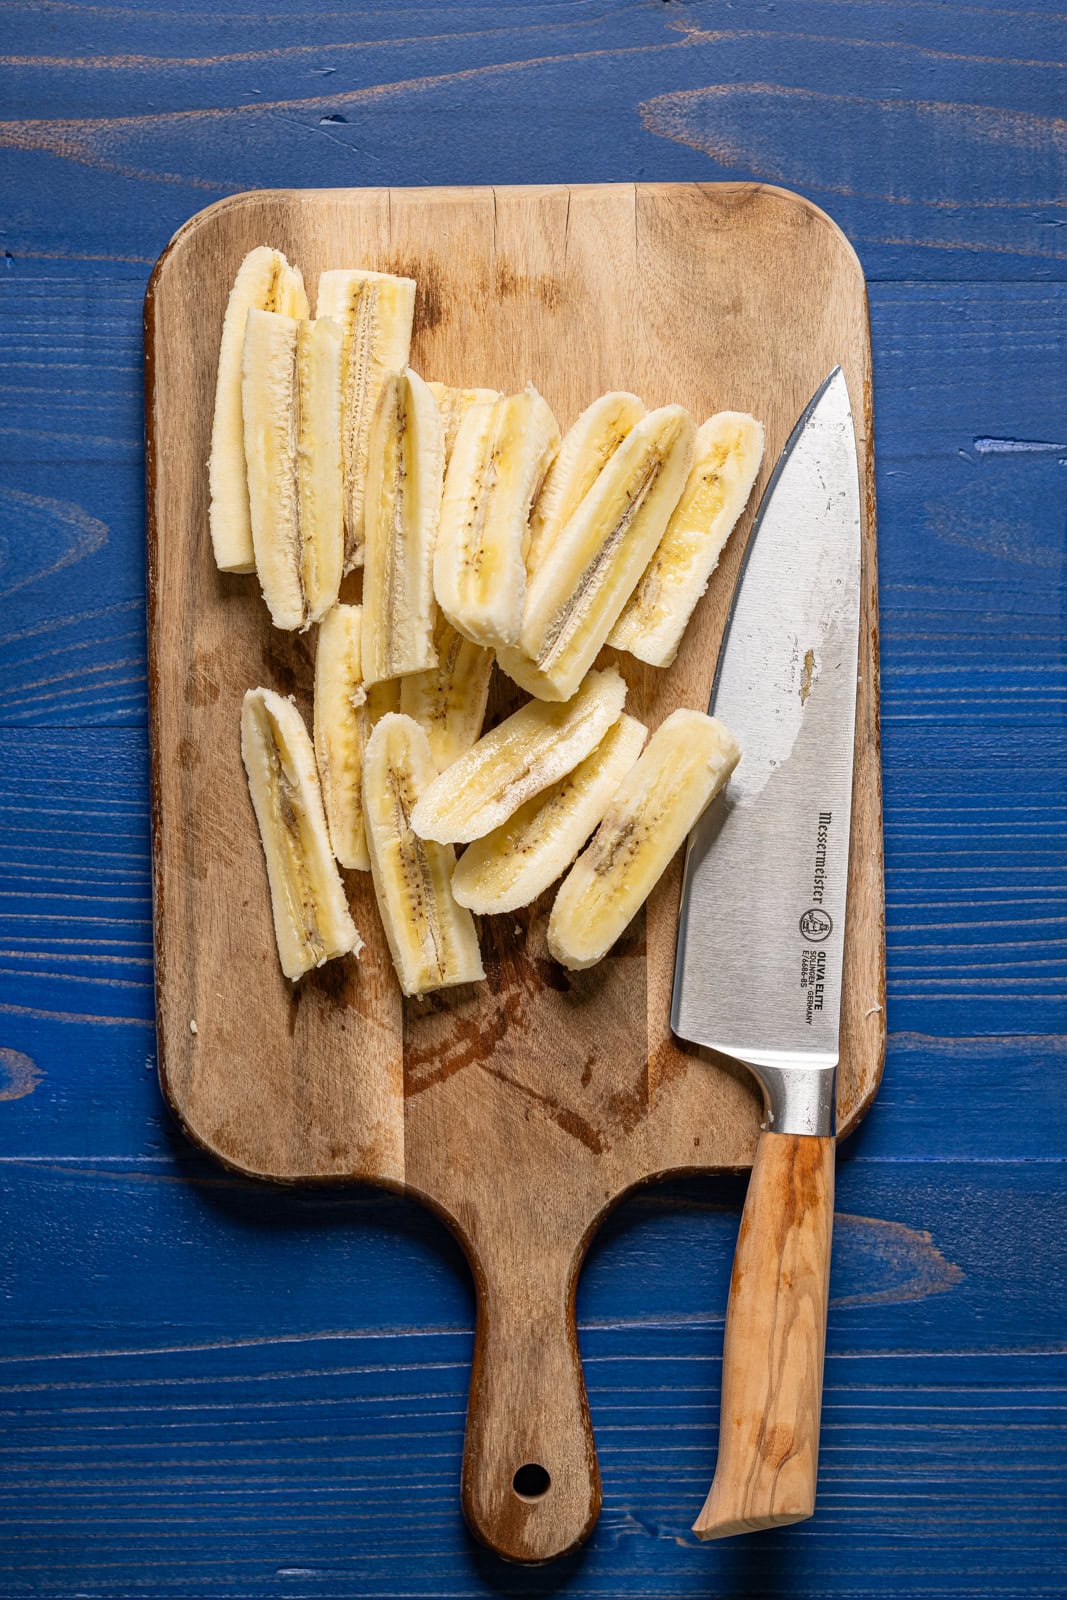 Sliced banana on a cutting board with a knife.